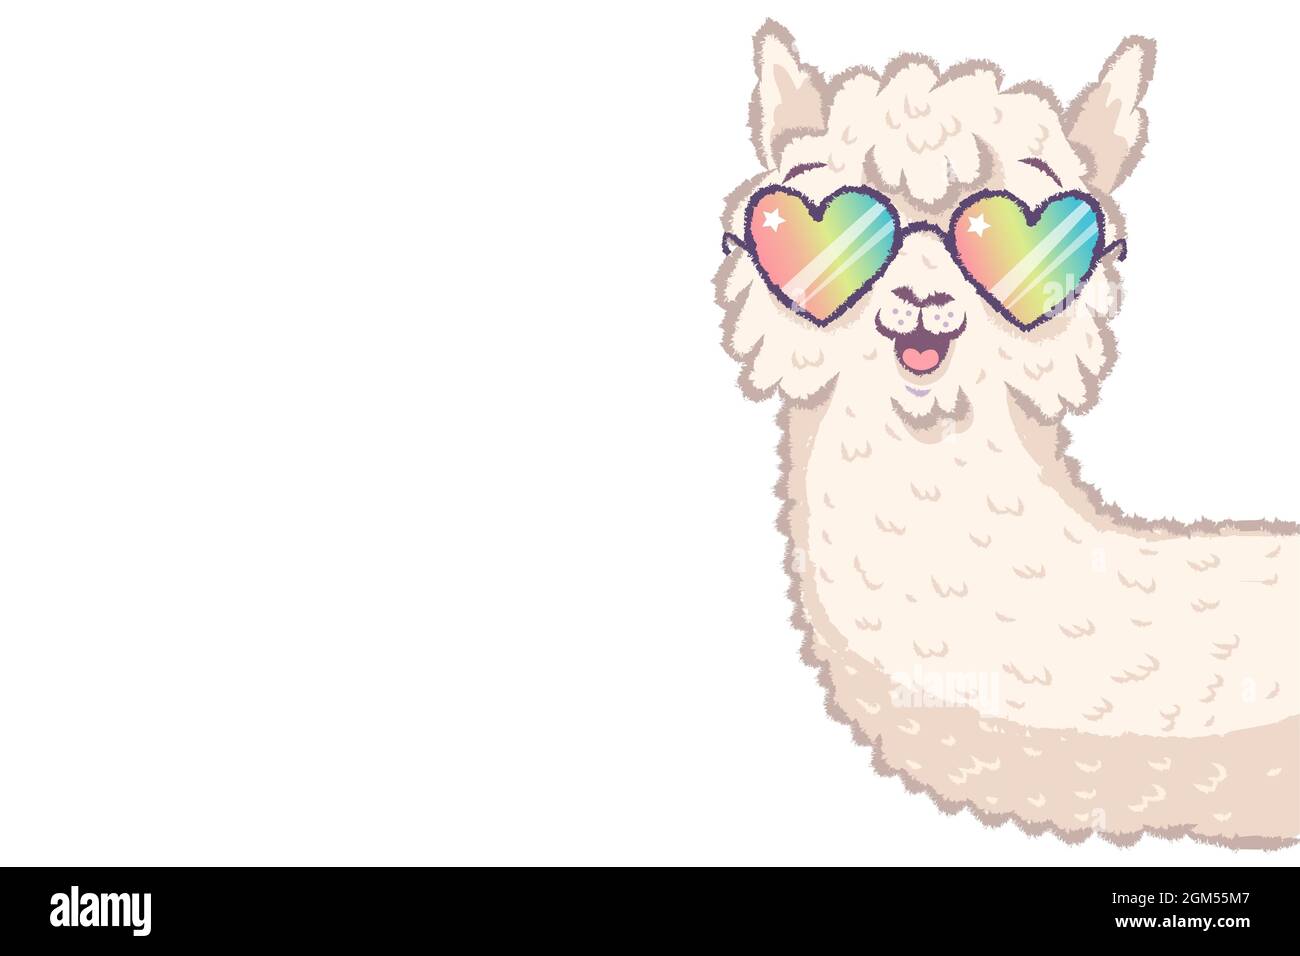 Vector illustration of a cute llama with rainbow glasses. Cute alpaca with glasses like hearts. Stock Vector